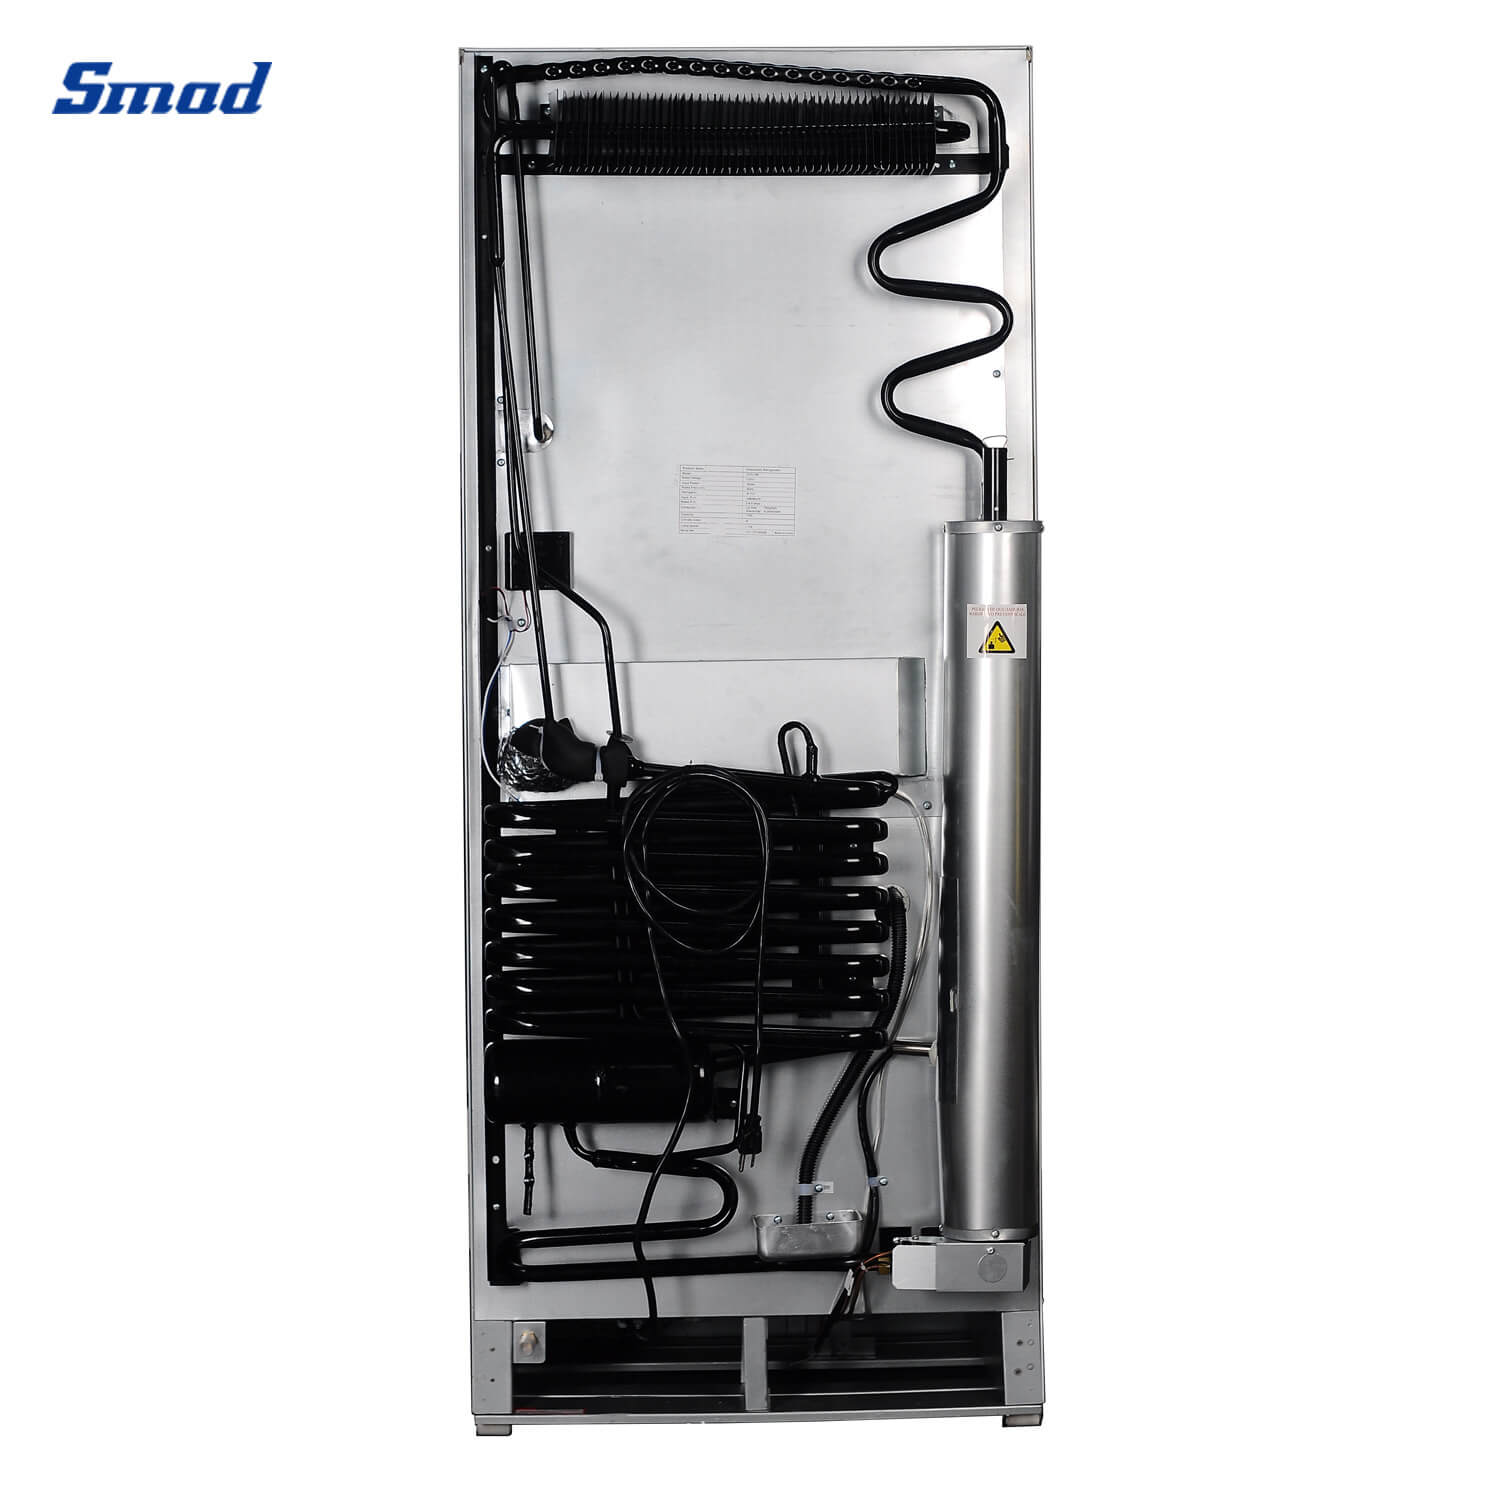 
Smad Gas / Absorption Double Door Refrigerator applicable for off-grid areas
